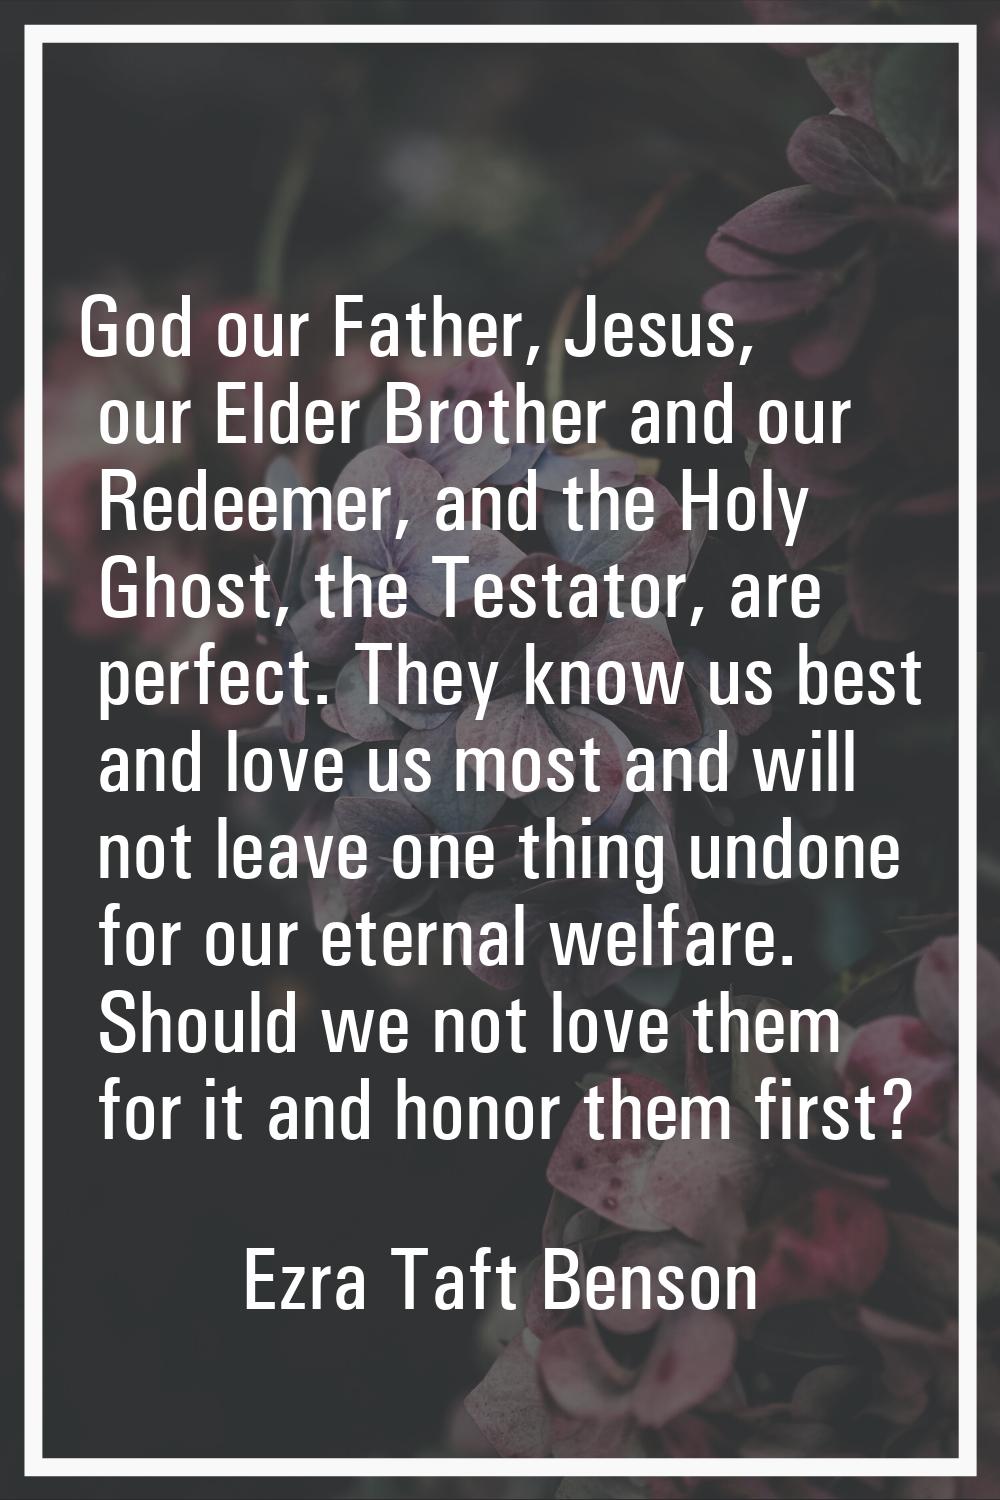 God our Father, Jesus, our Elder Brother and our Redeemer, and the Holy Ghost, the Testator, are pe